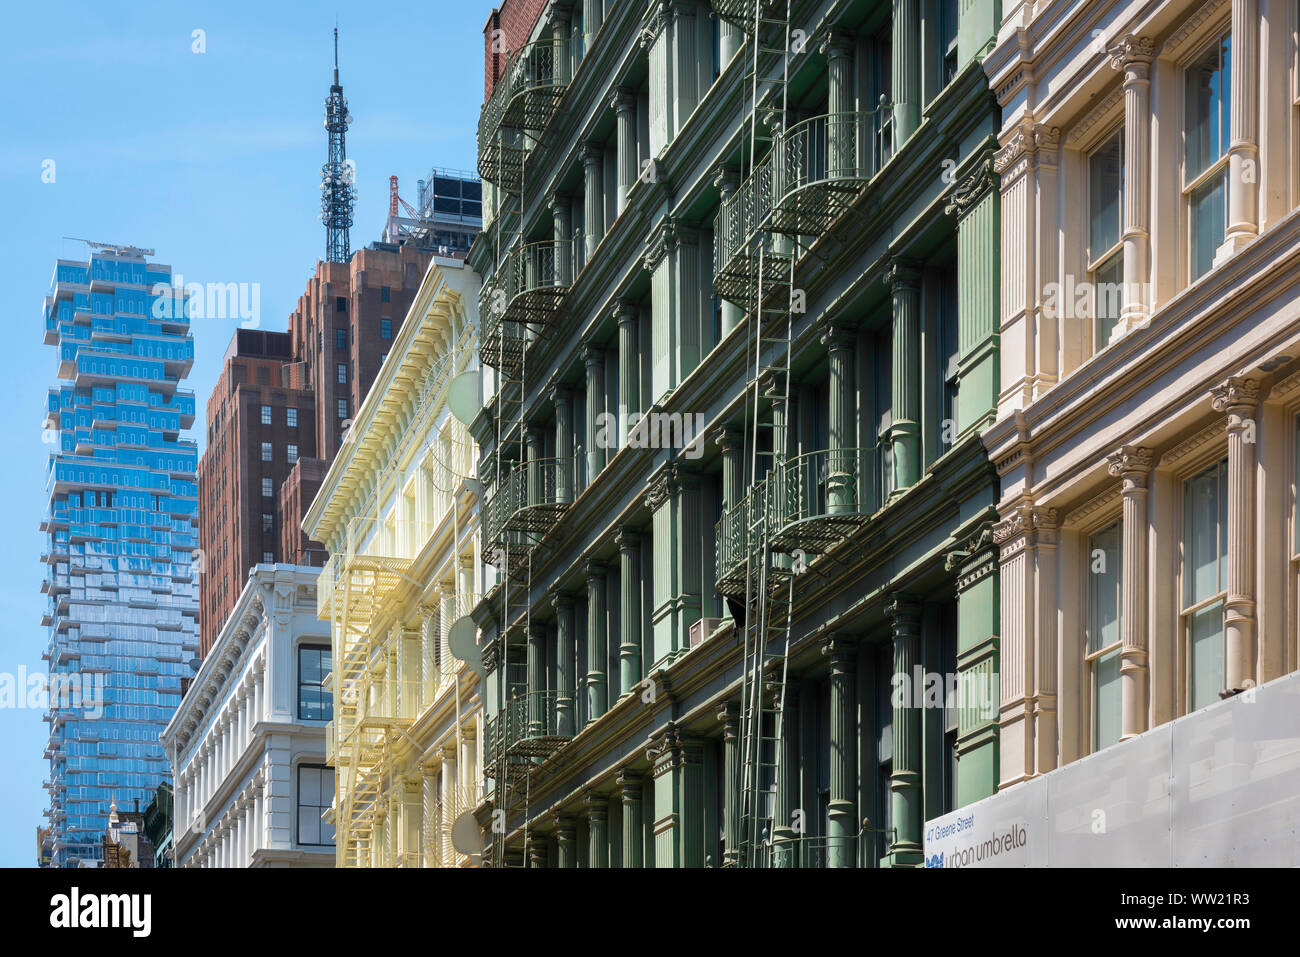 Soho New York, view of the Tribeca 'jenga building' and Cast Iron District buildings in Green Street in the Soho area of New York City, USA Stock Photo